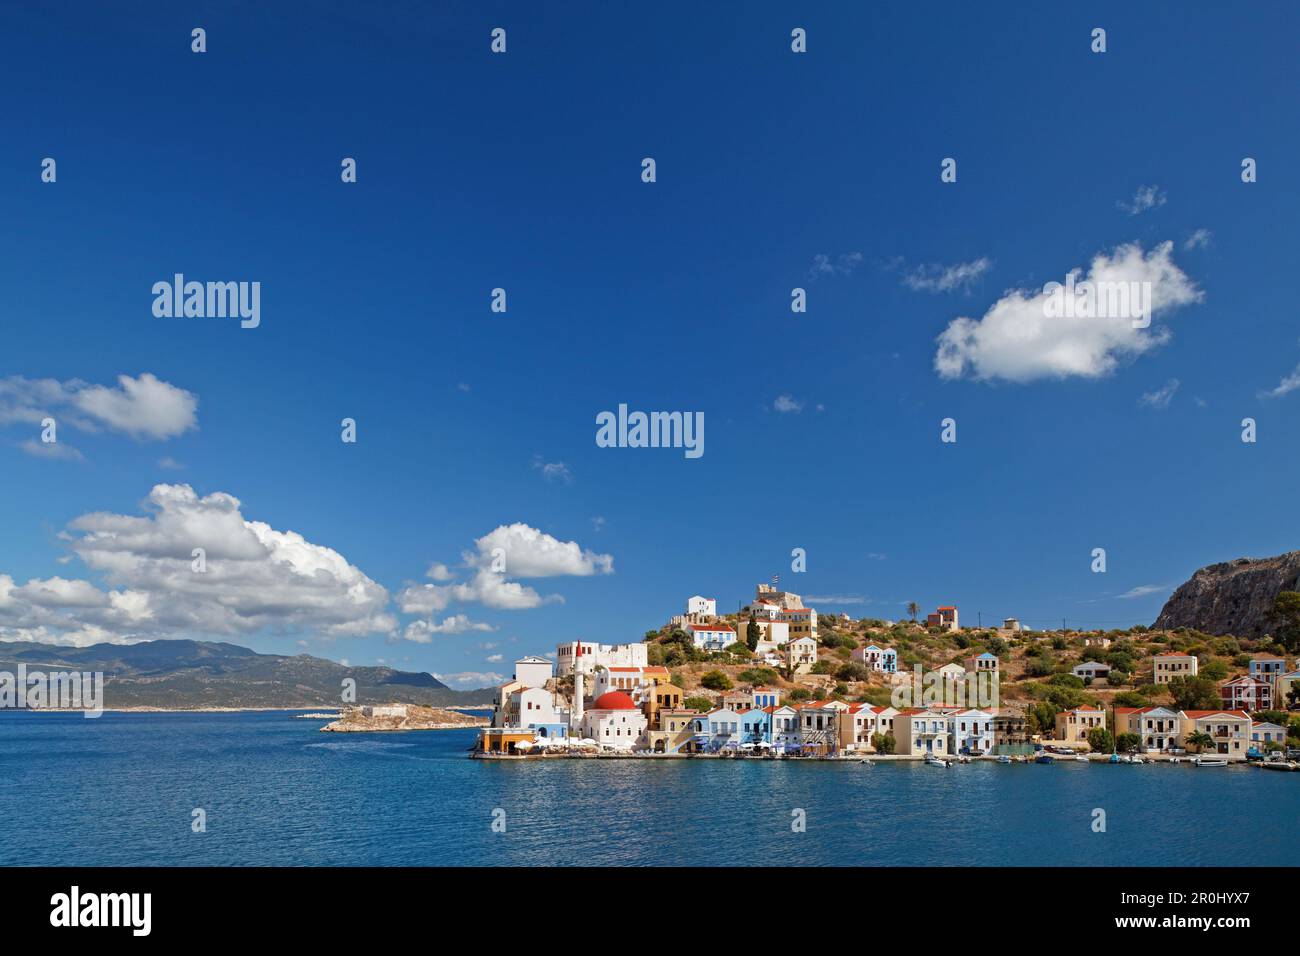 Harbour and view of Kastellorizo, Dodecanese, South Aegean, Greece Stock Photo